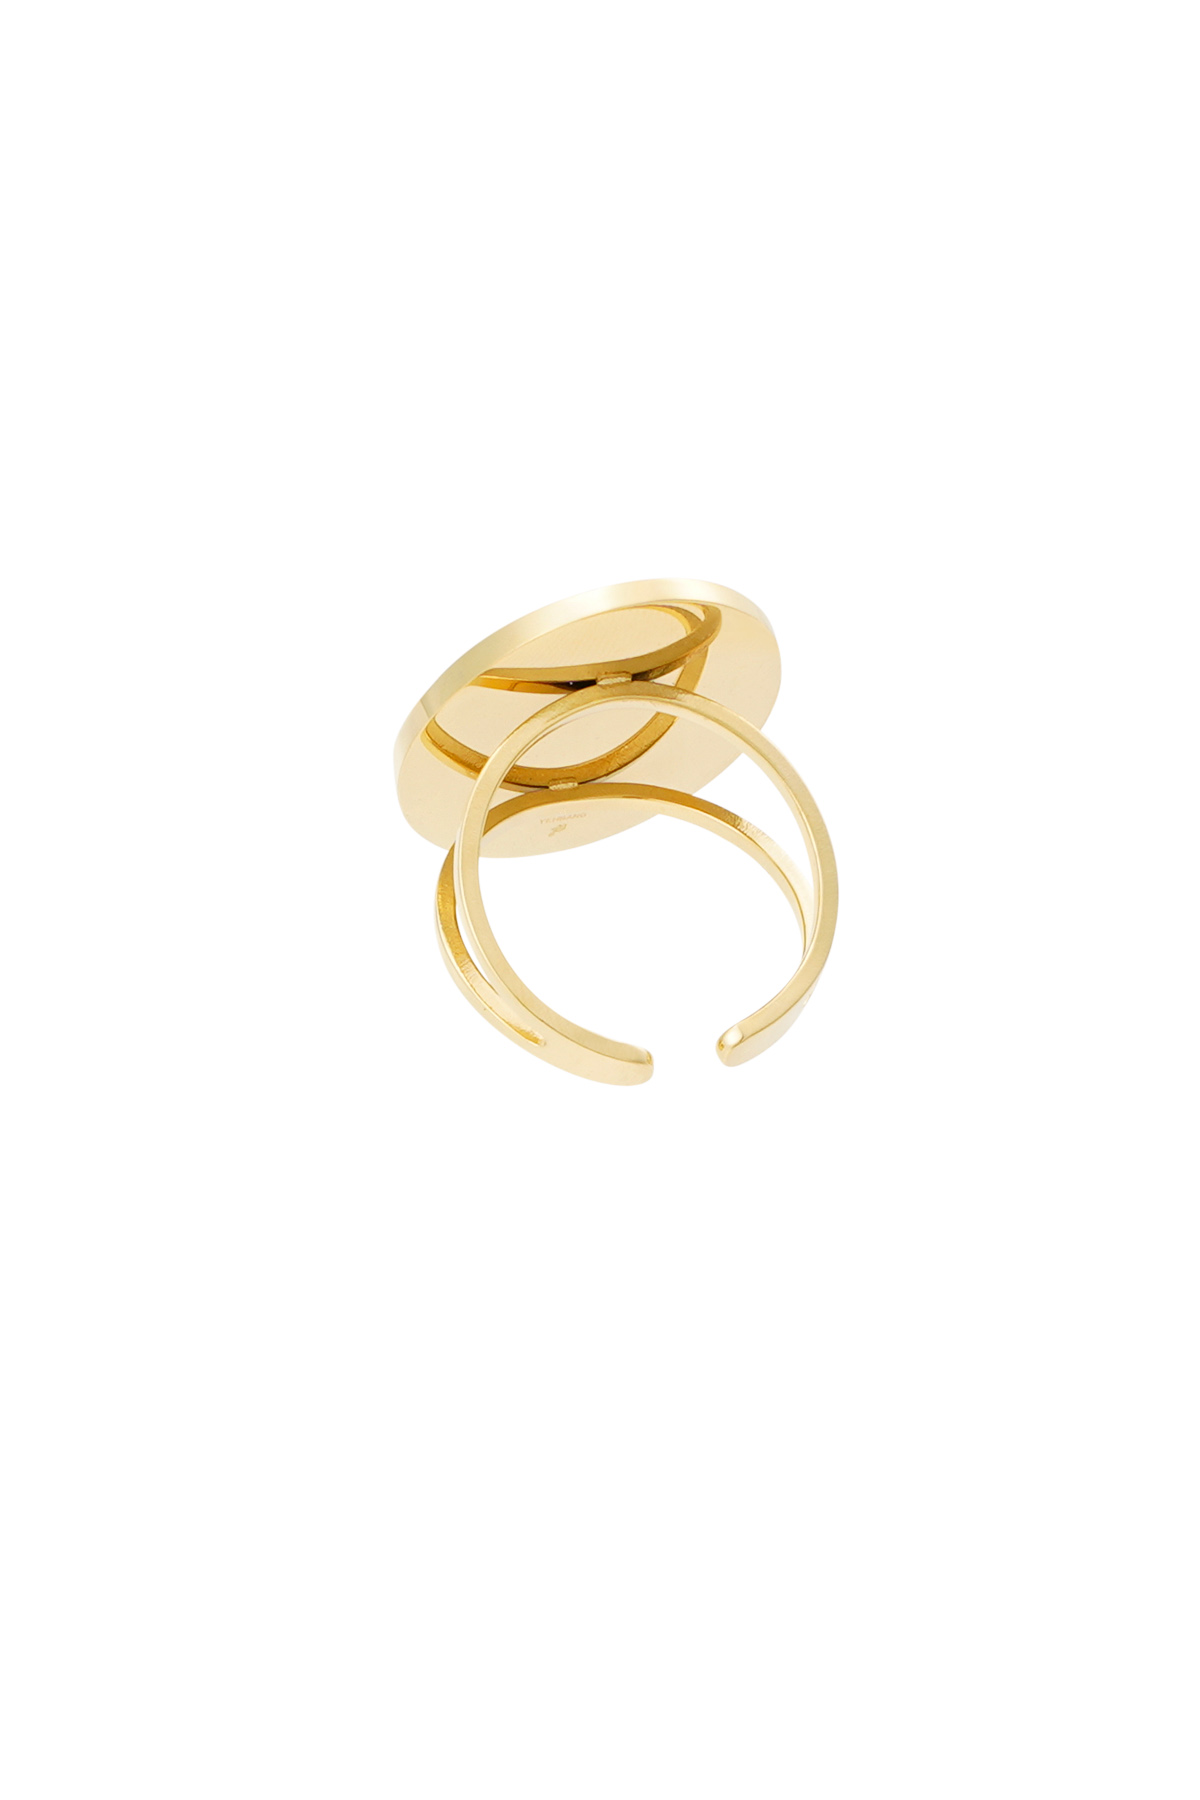 Ring large stone - gold/white Picture4